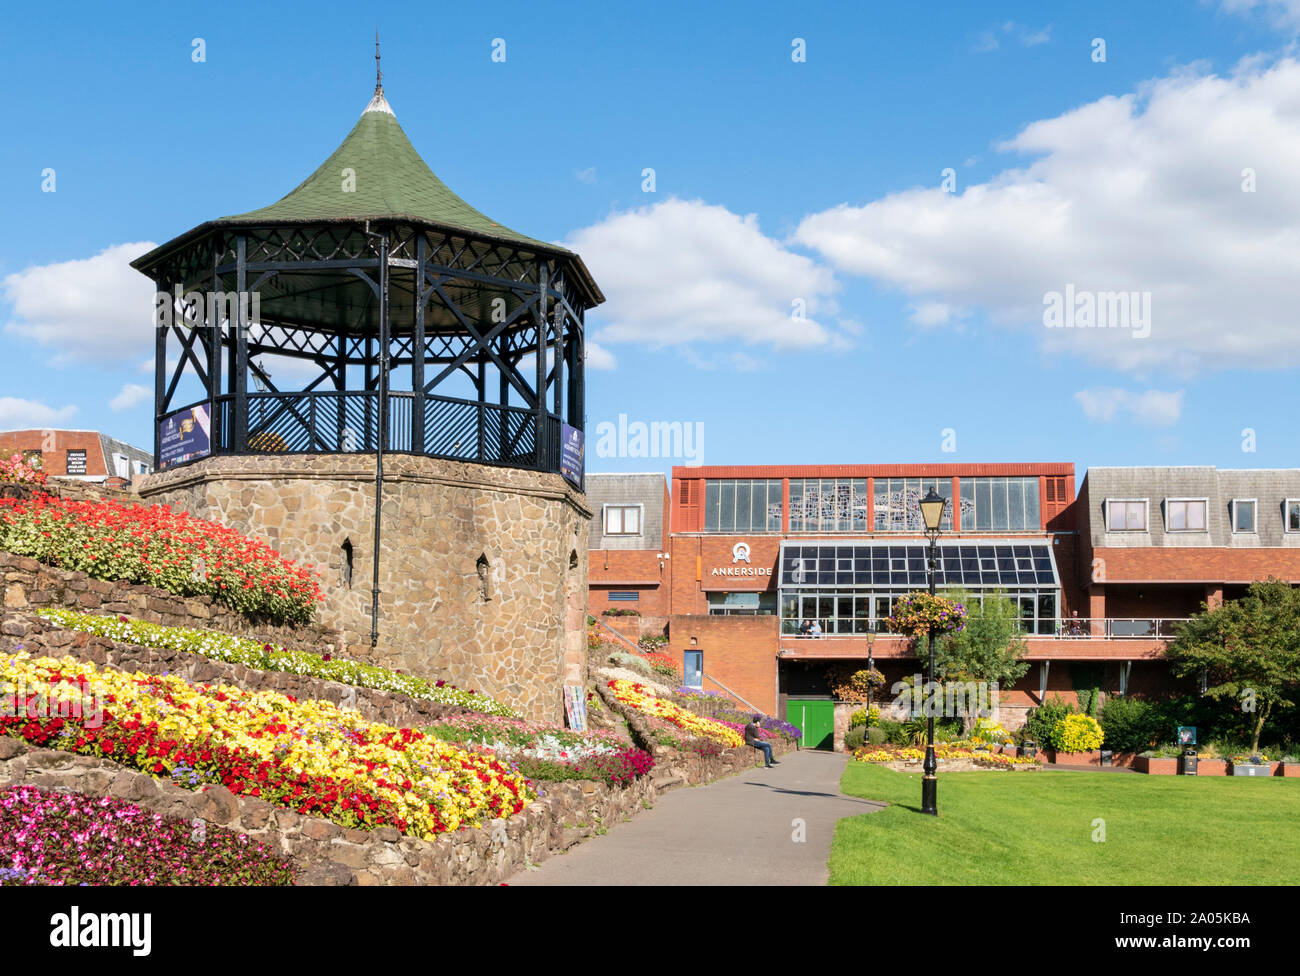 Tamworth castle grounds and bandstand town centre Staffordshire England UK GB UK Europe Stock Photo